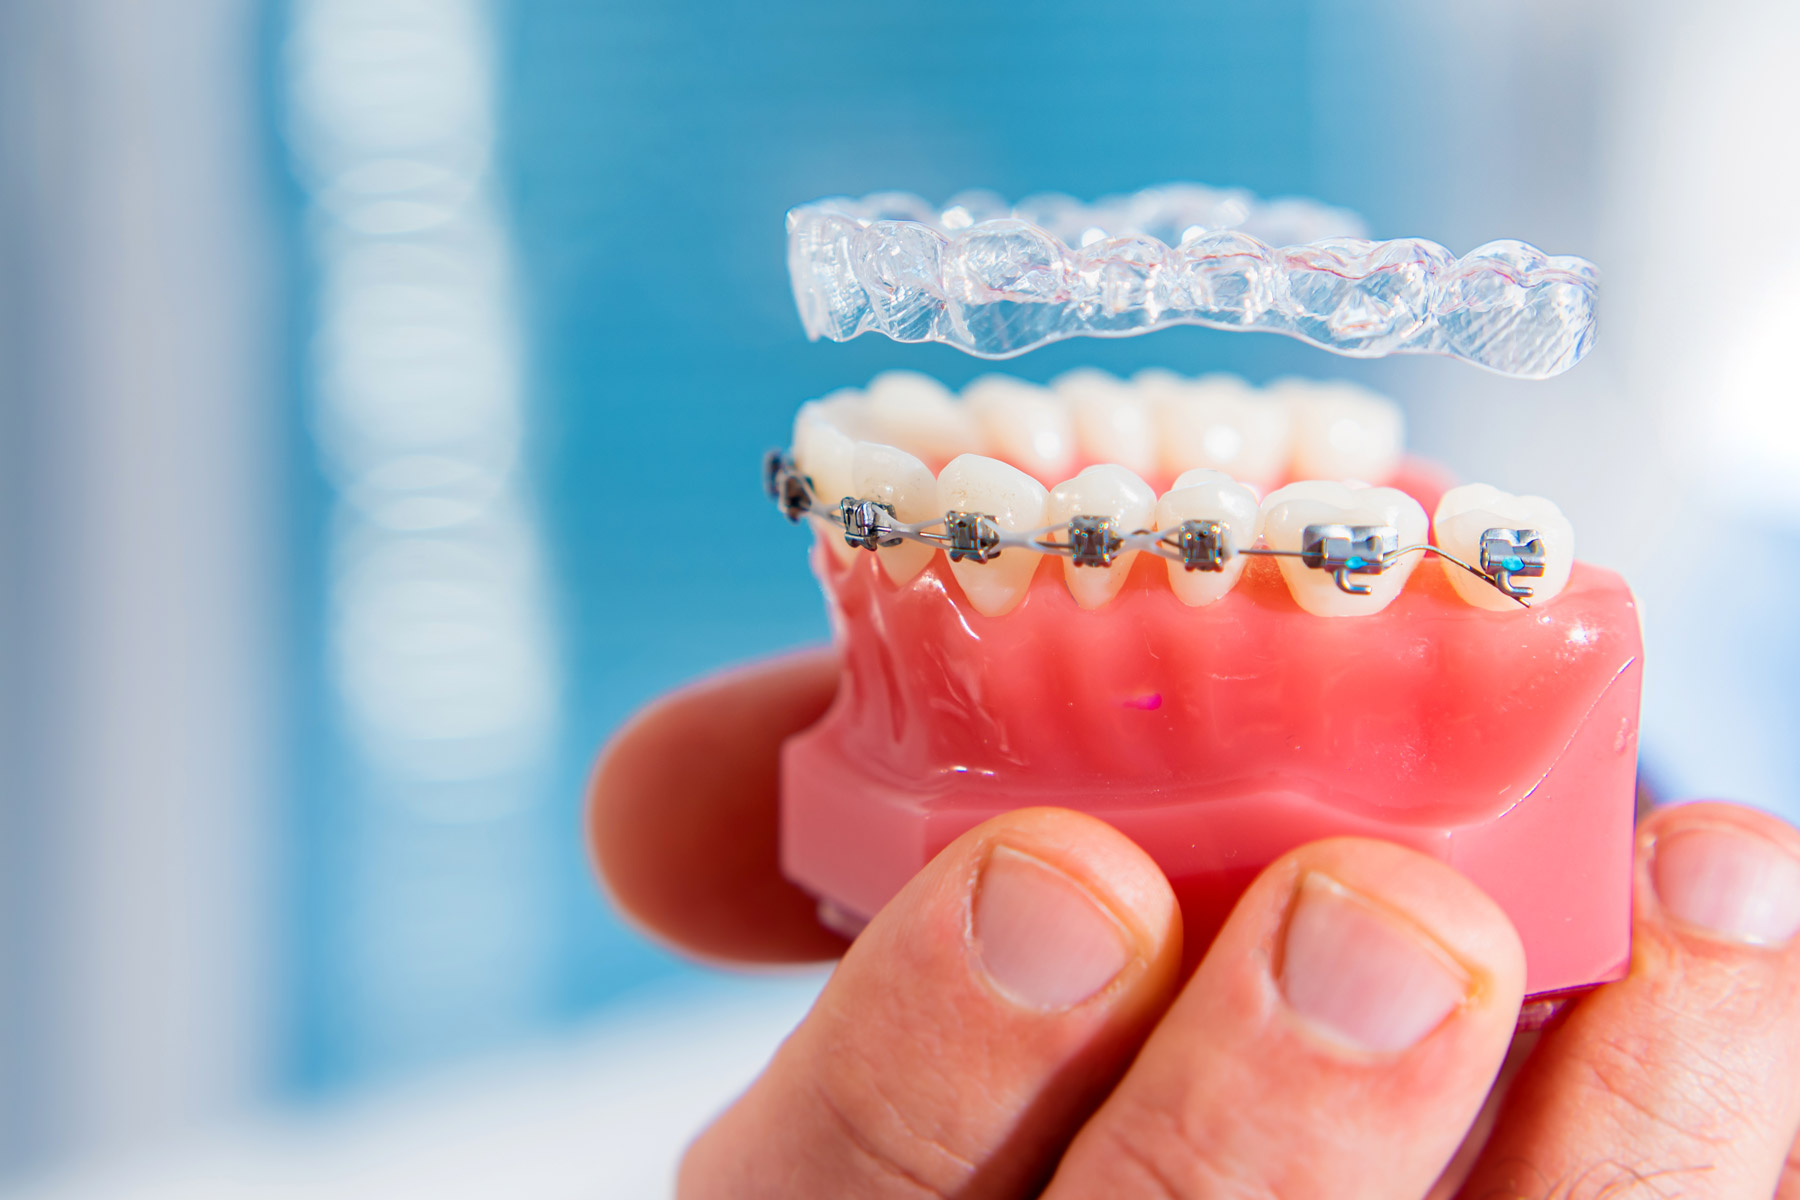 Invisalign VS Braces - Everything You Should Consider